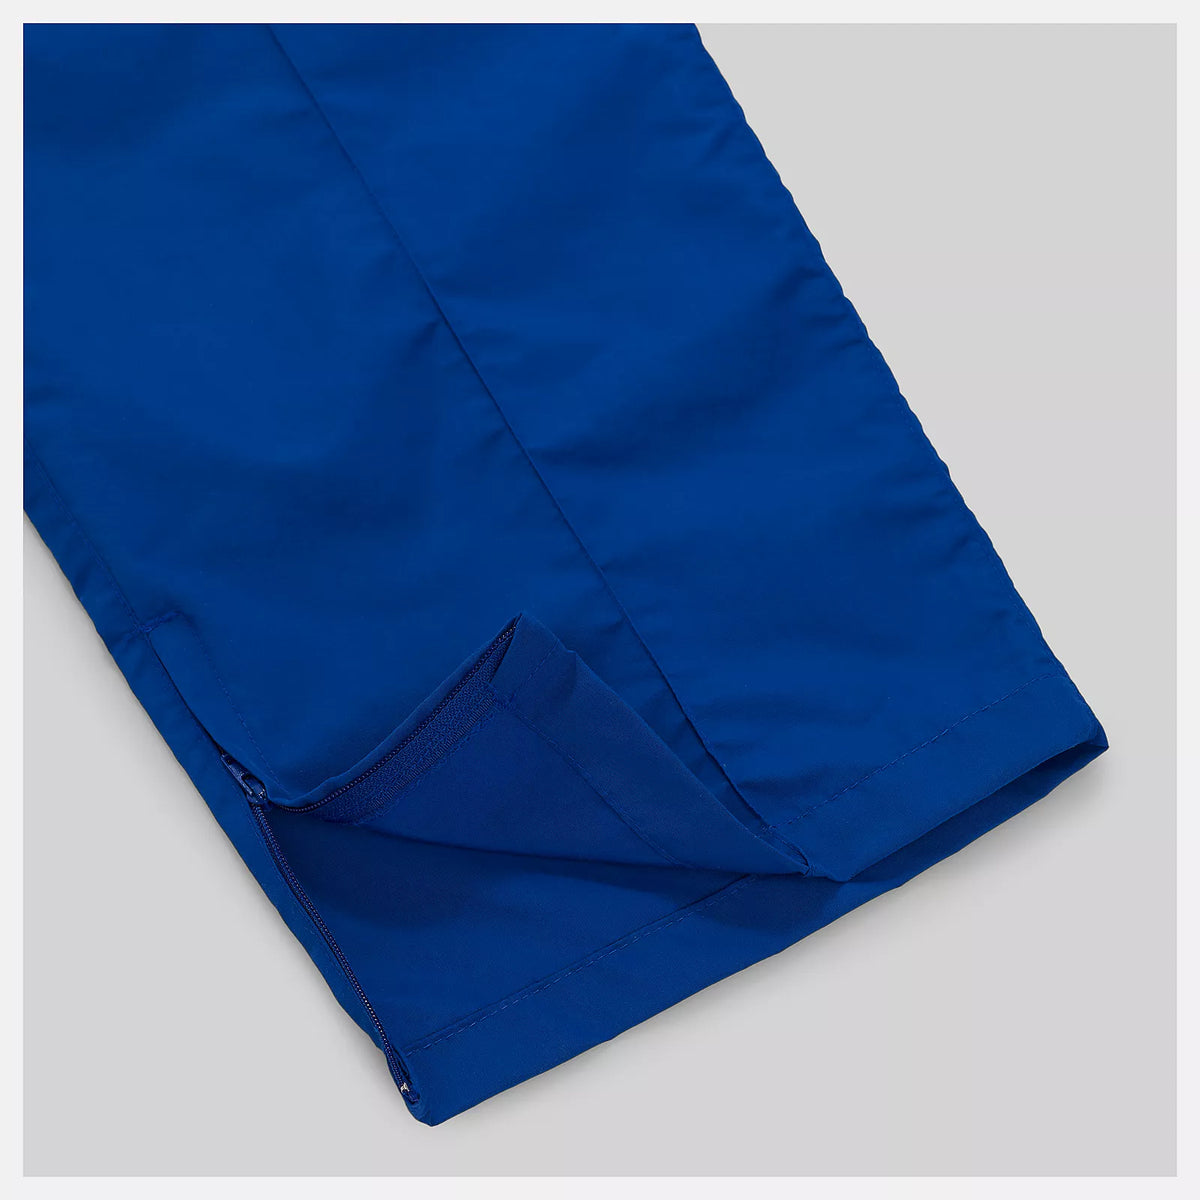 MADE in USA Woven Pant - Team Royal